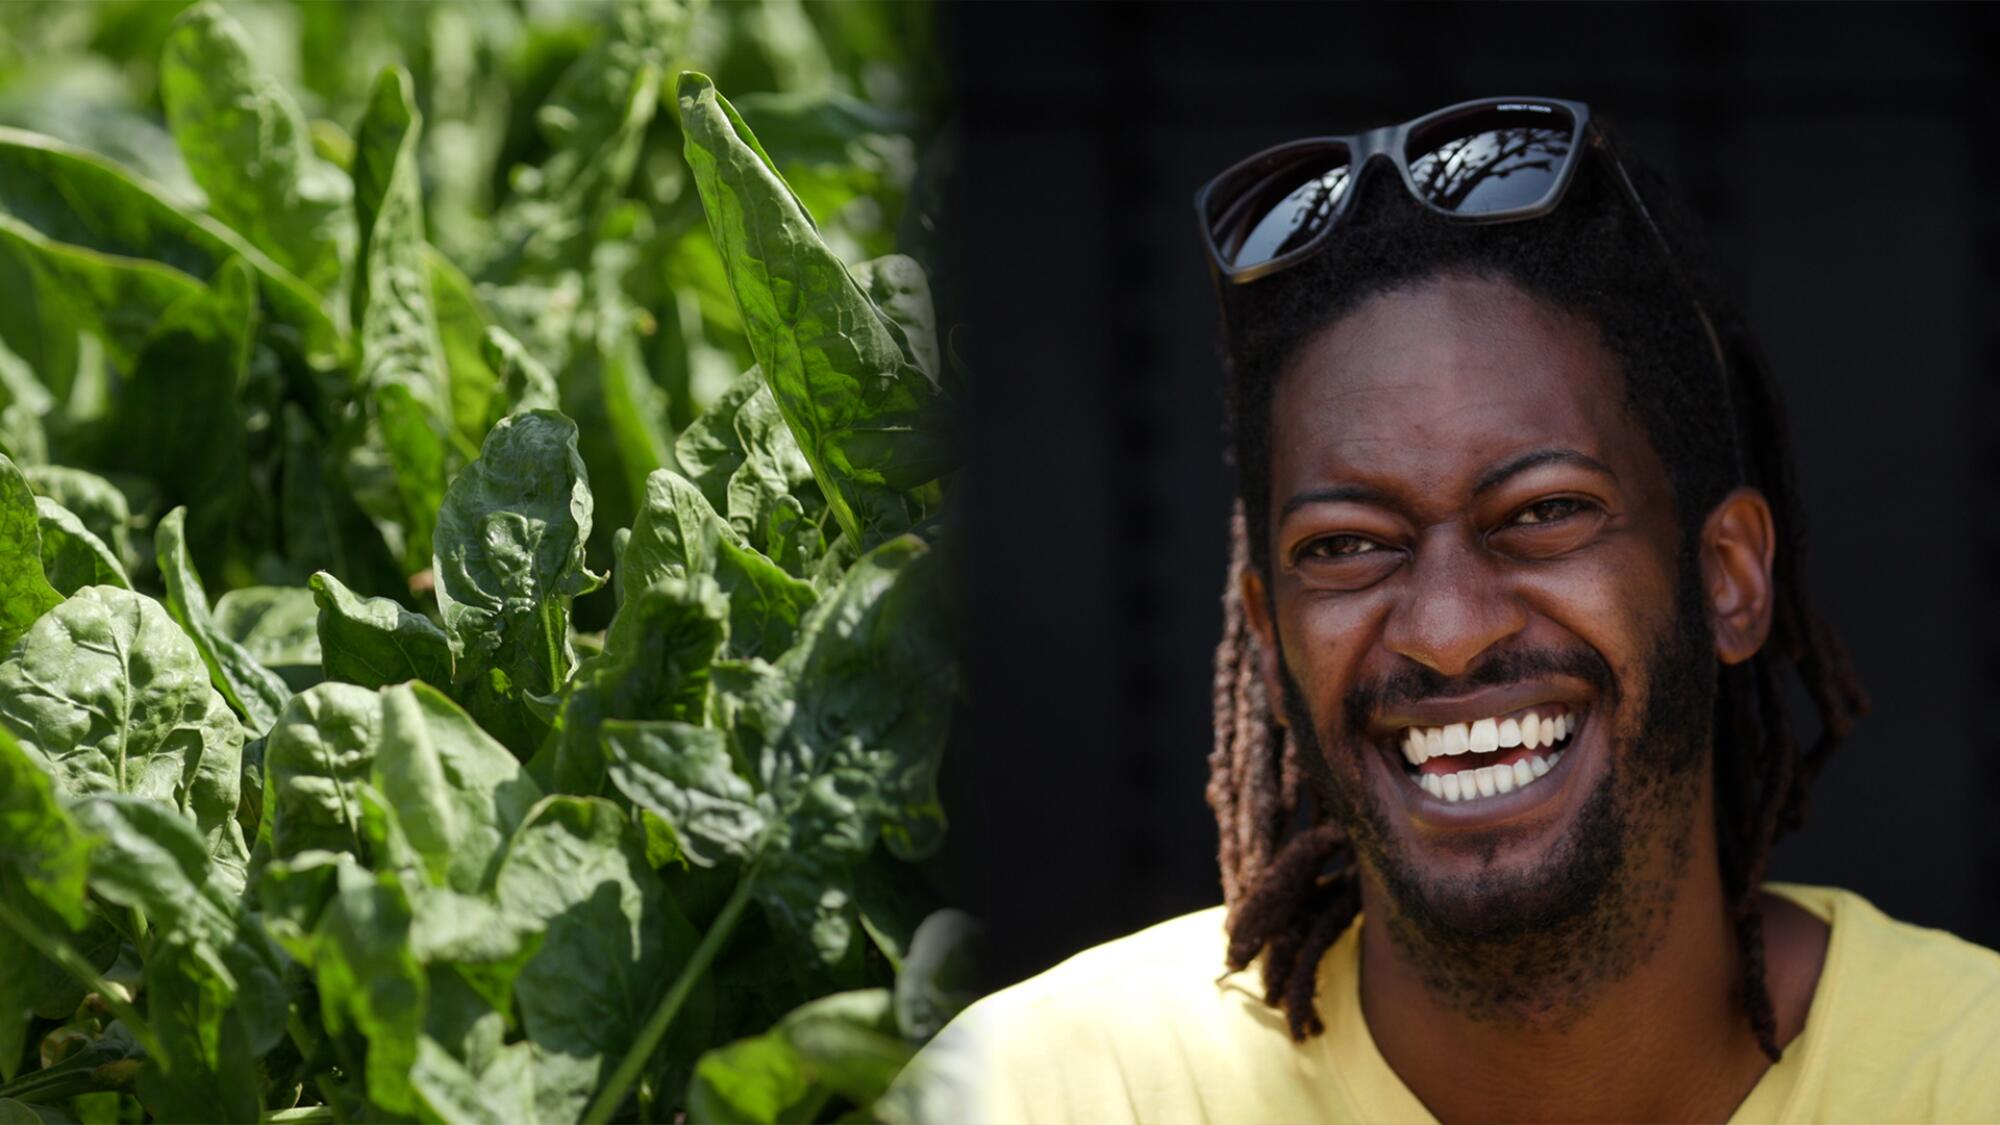 Urban gardener Jamiah Hargins, smiling, with dreads and sunglasses on his head.